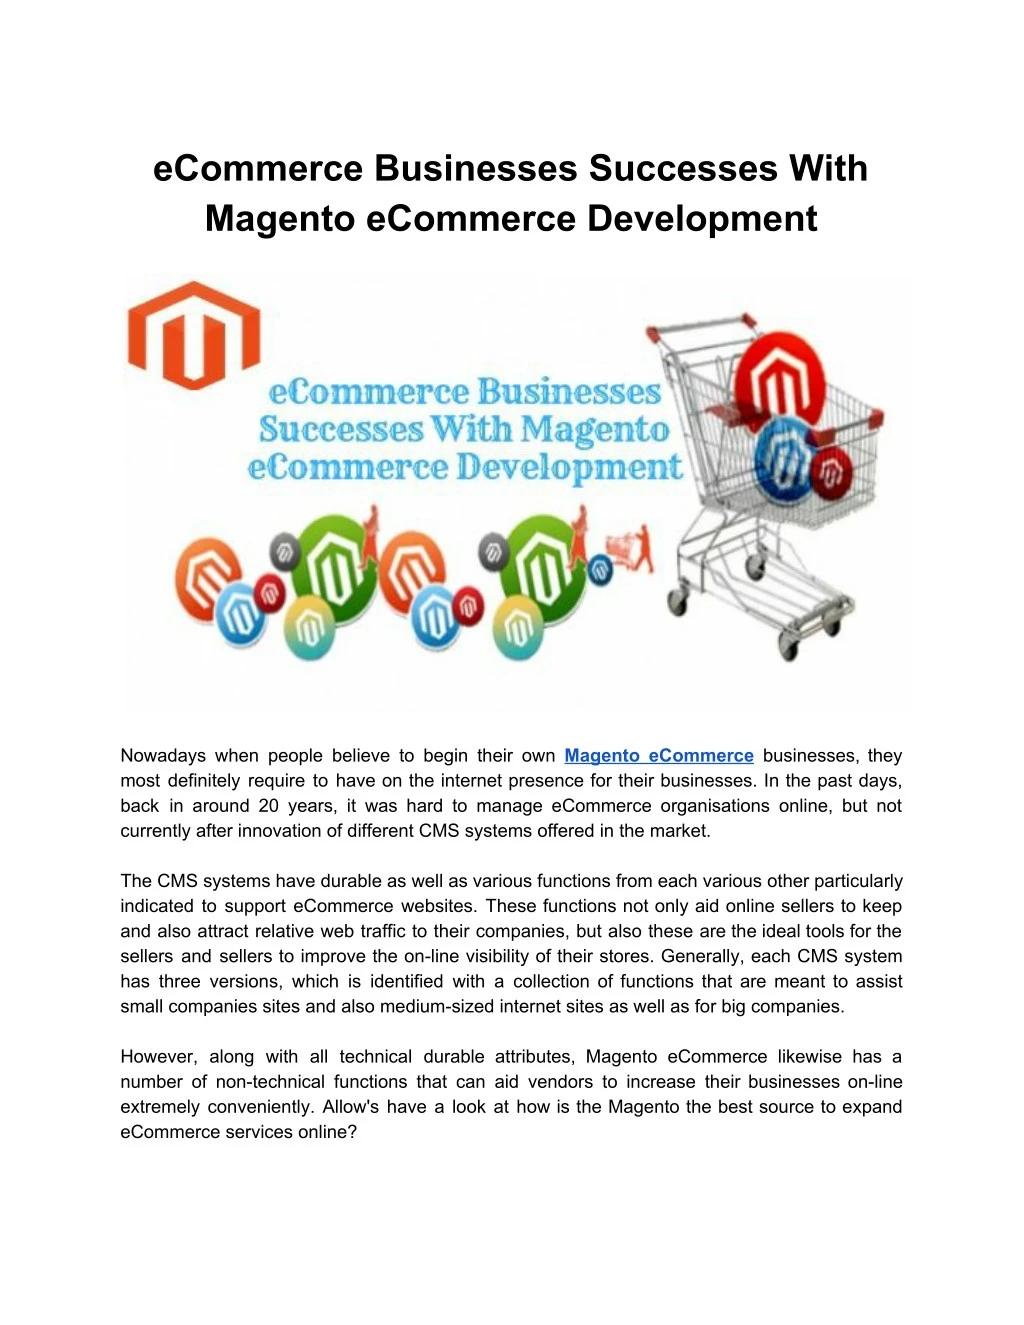 ecommerce businesses successes with magento